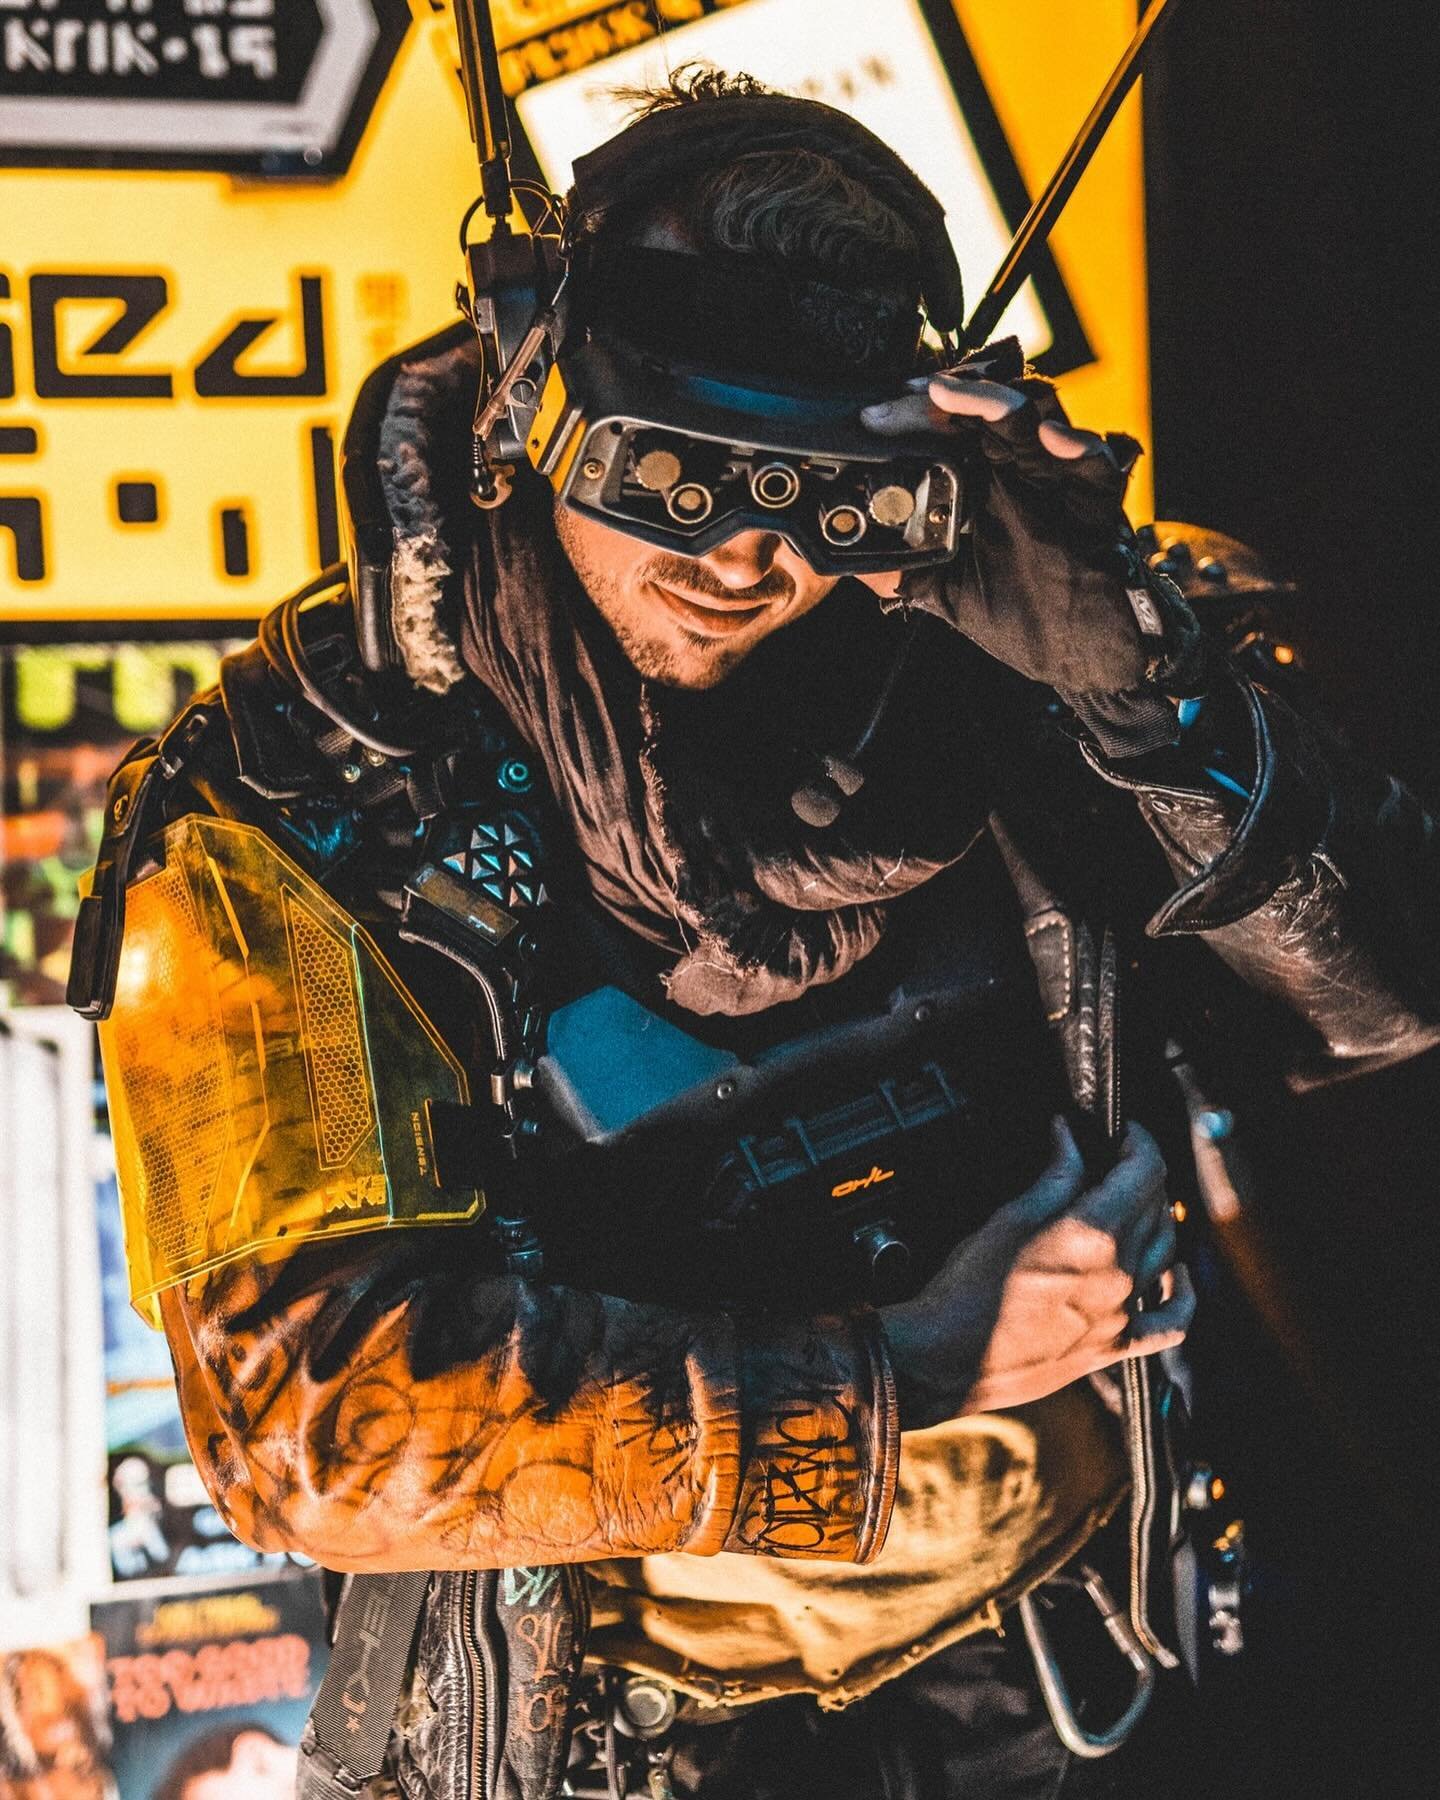 Goggles on or off? 

Slummin&rsquo; outside the Gentleman Loser bar at @neotropolisevent this year. Absolutely love how their frontage is the perfect gritty cyberpunk look at the event. Very stoked to keep working on these goggles too - kitbashed wit